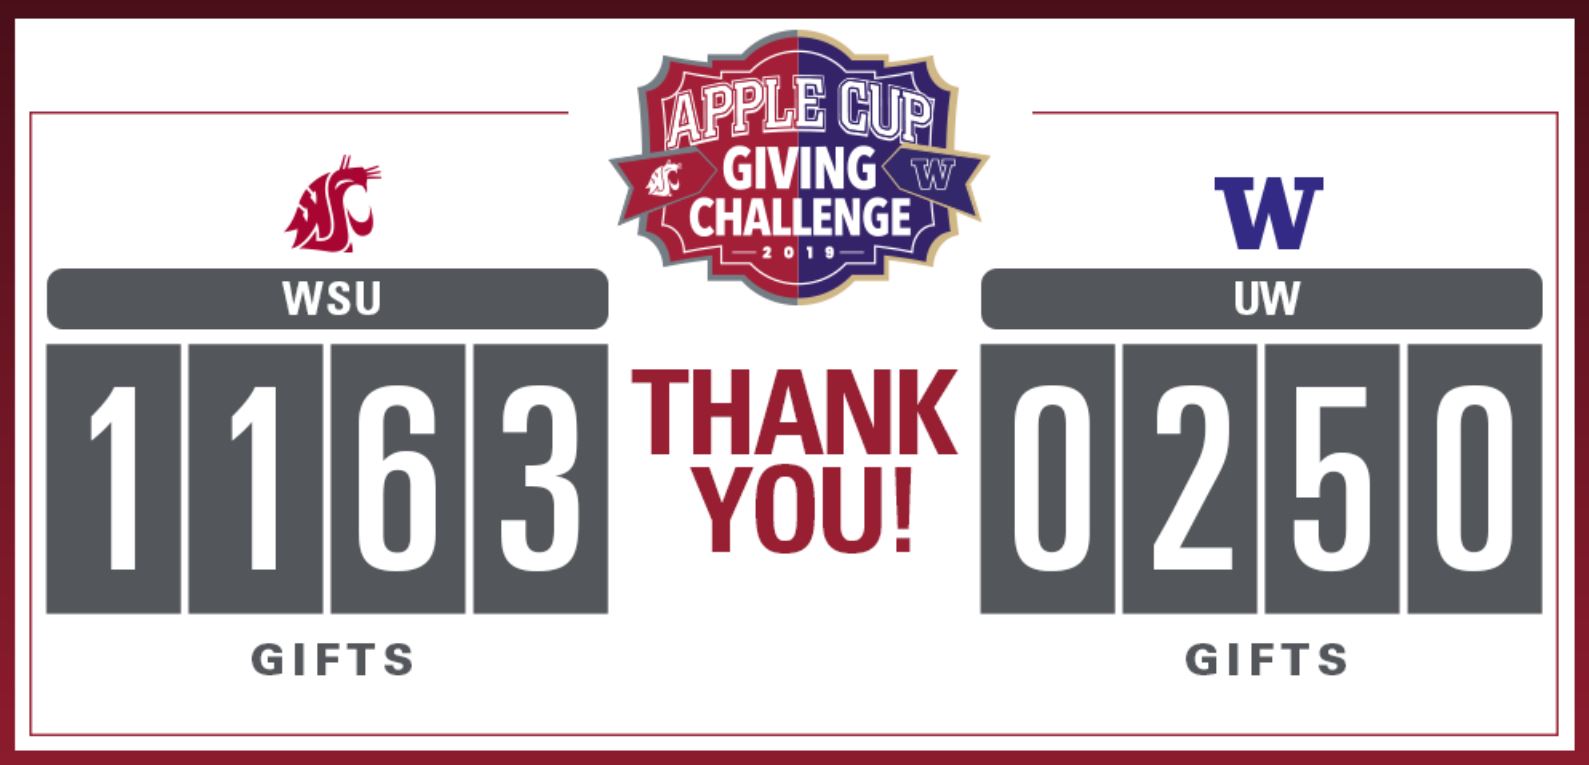 Apple Cup Giving Challenge